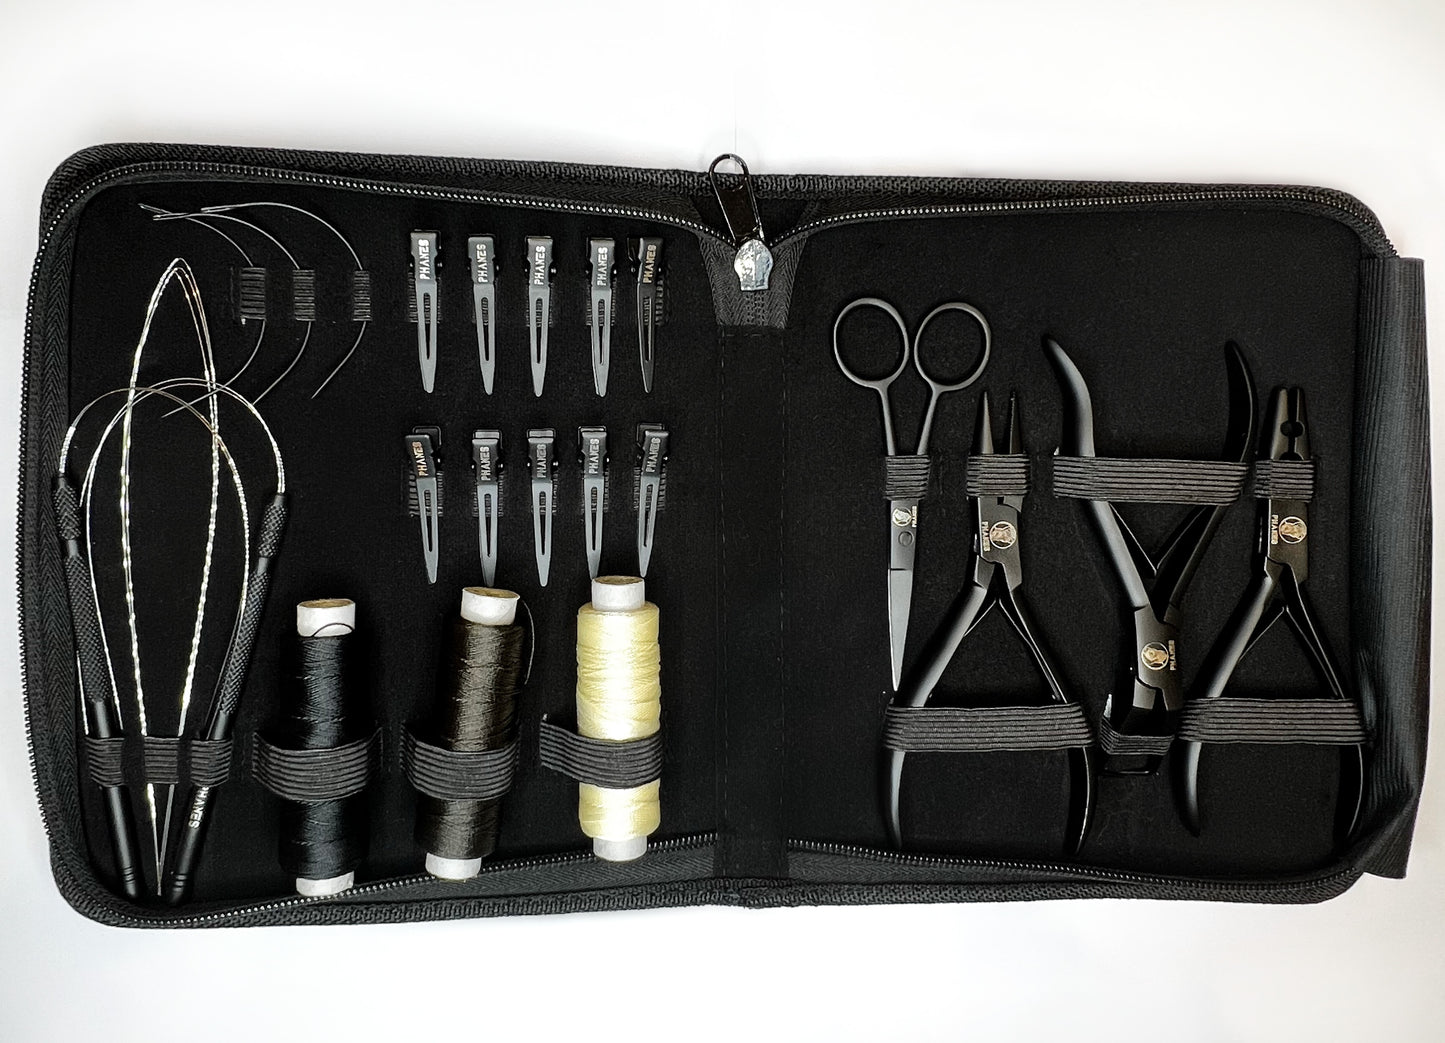 THE ULTIMATE EXTENSION TOOL KIT – DWhair